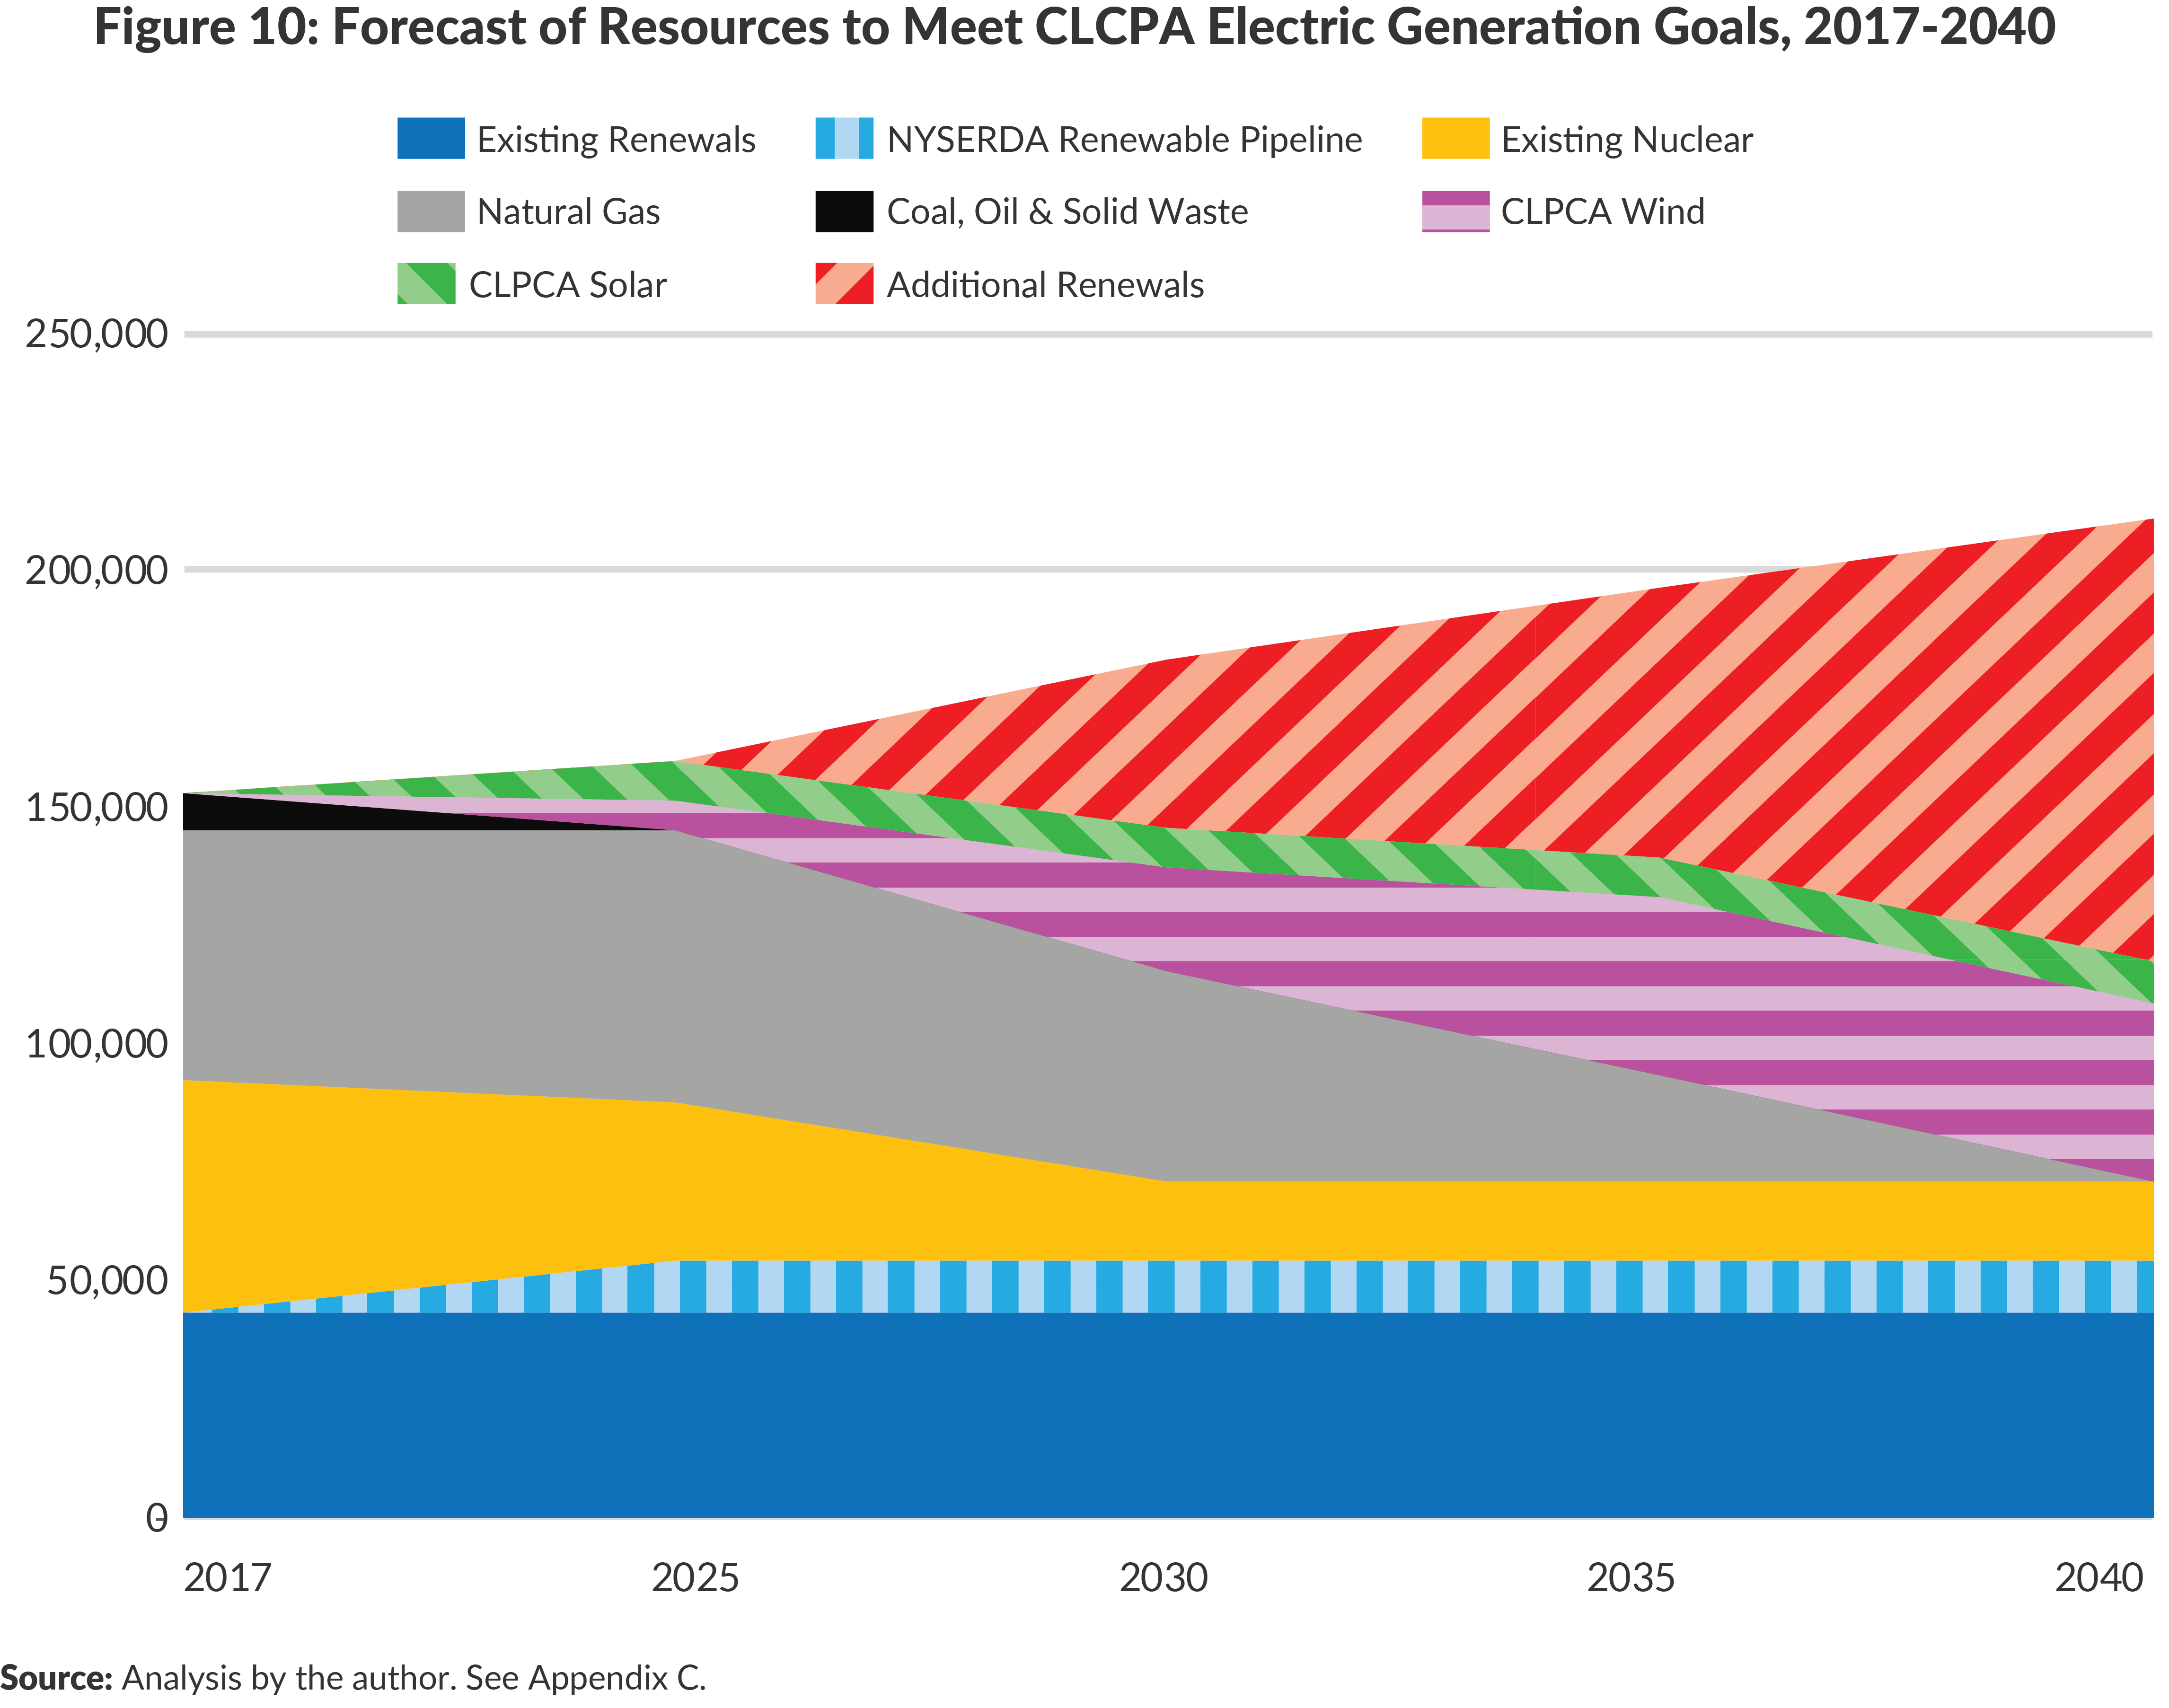 Figure 10: Forecast of Resources to Meet CLCPA Electric Generation Goals, 2017-2040